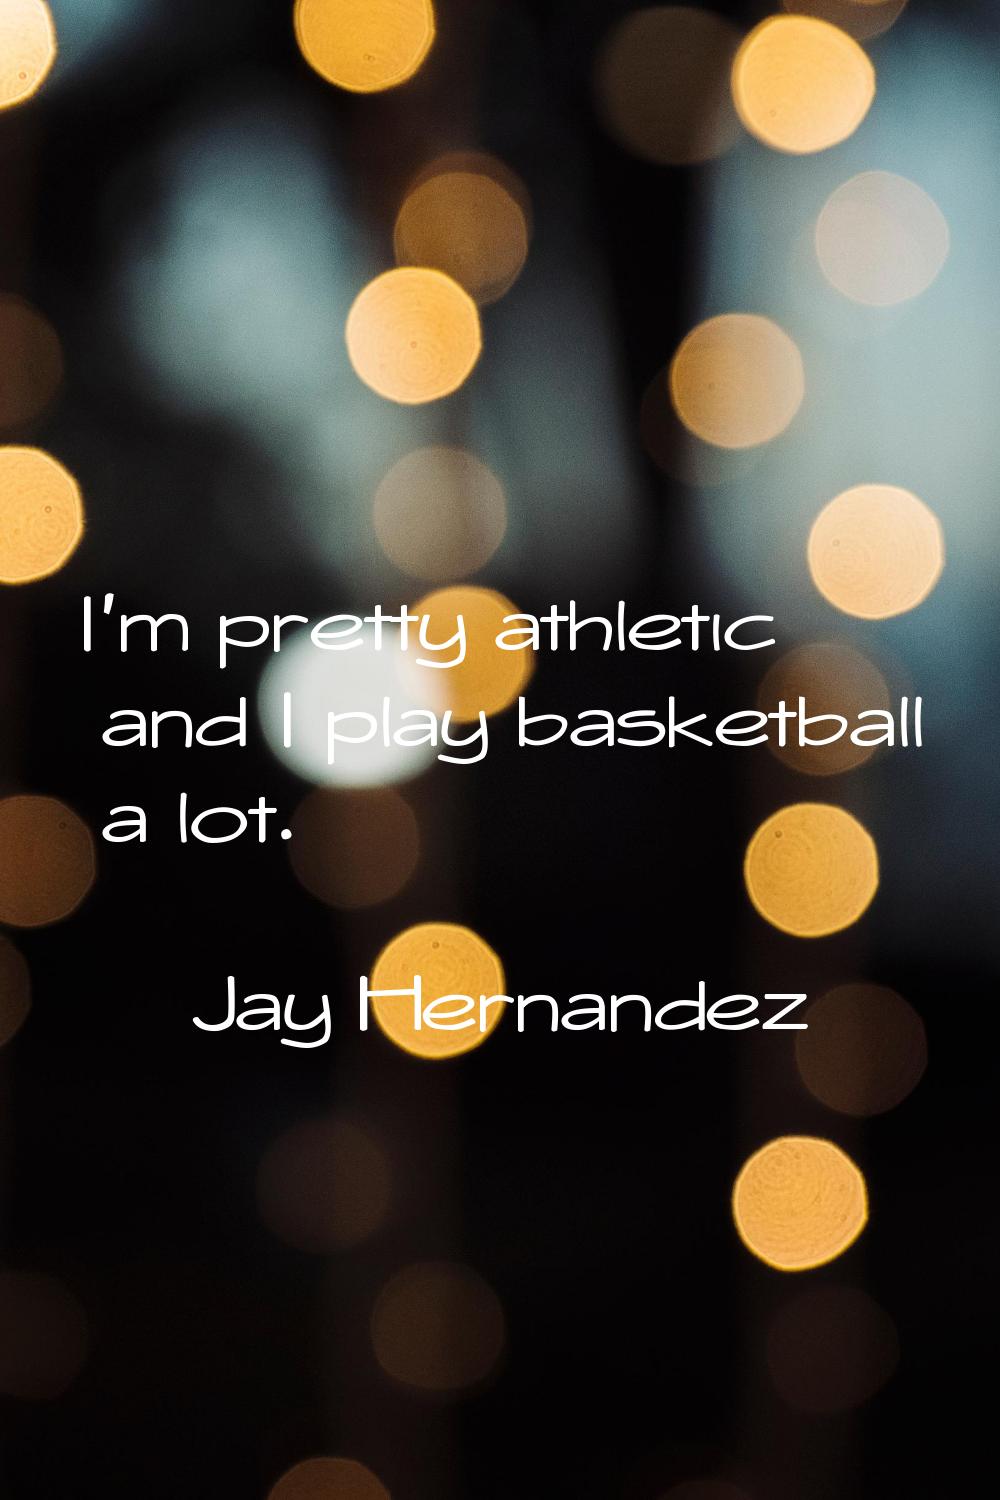 I'm pretty athletic and I play basketball a lot.